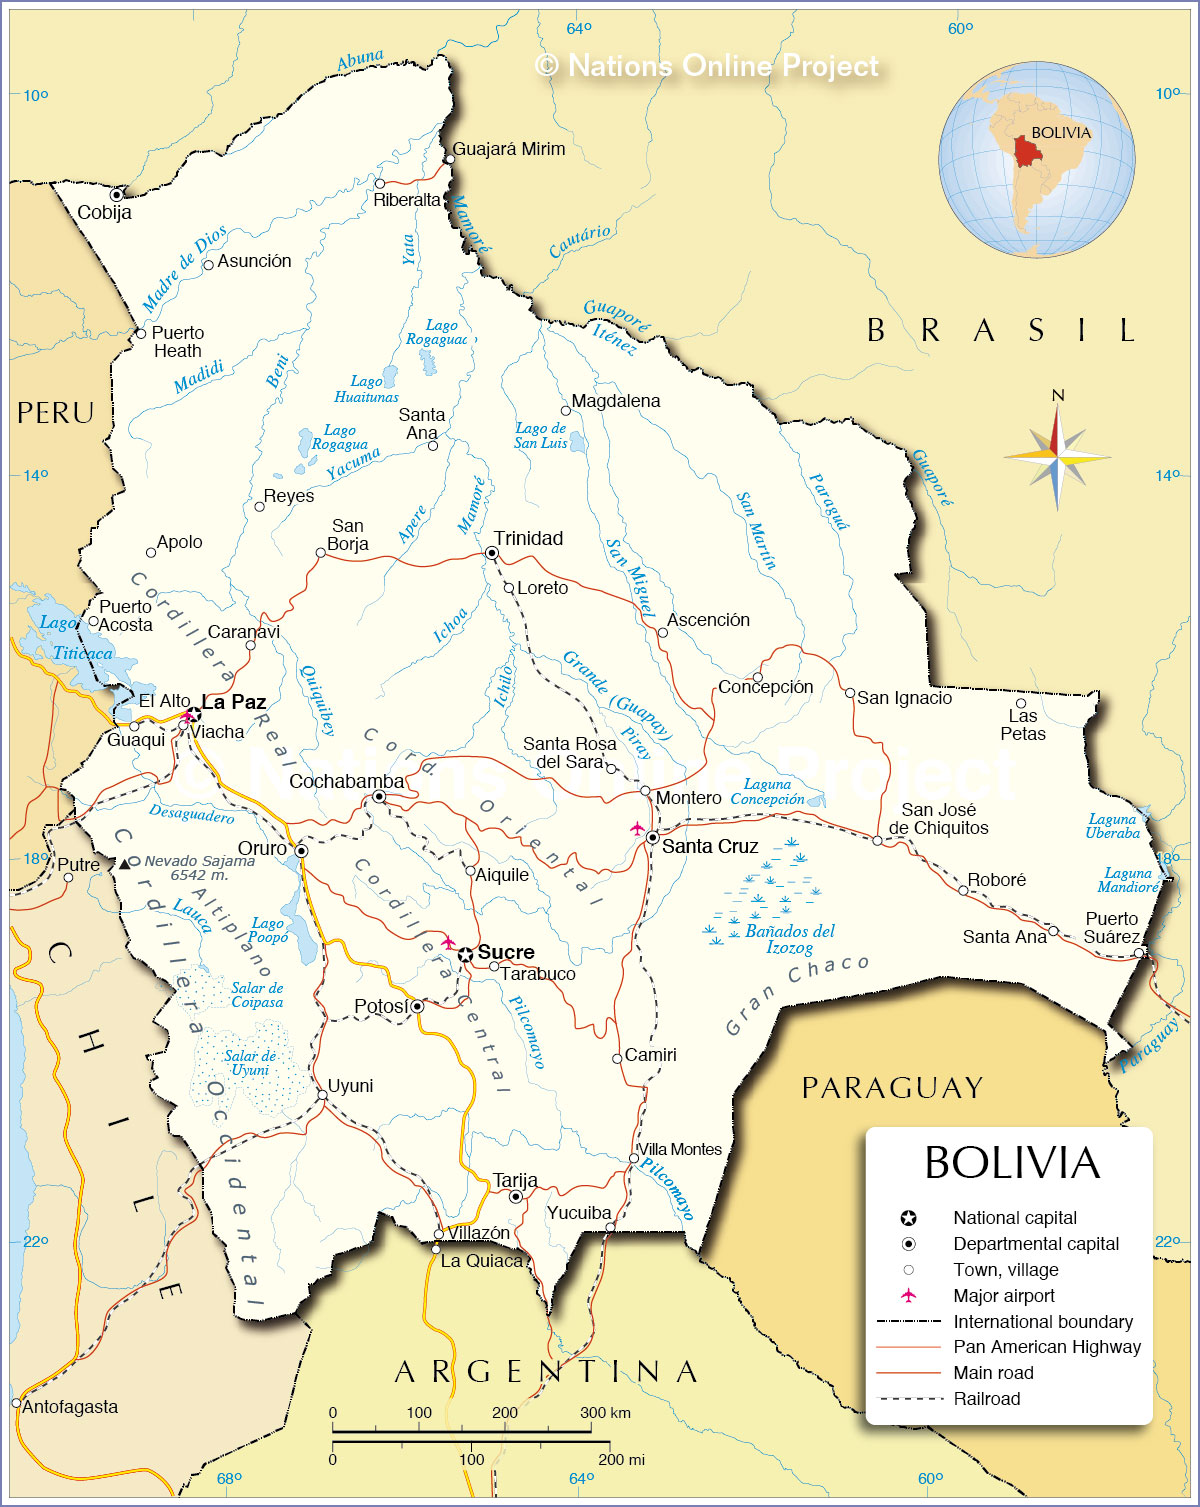 Political Map of Bolivia - Nations Online Project